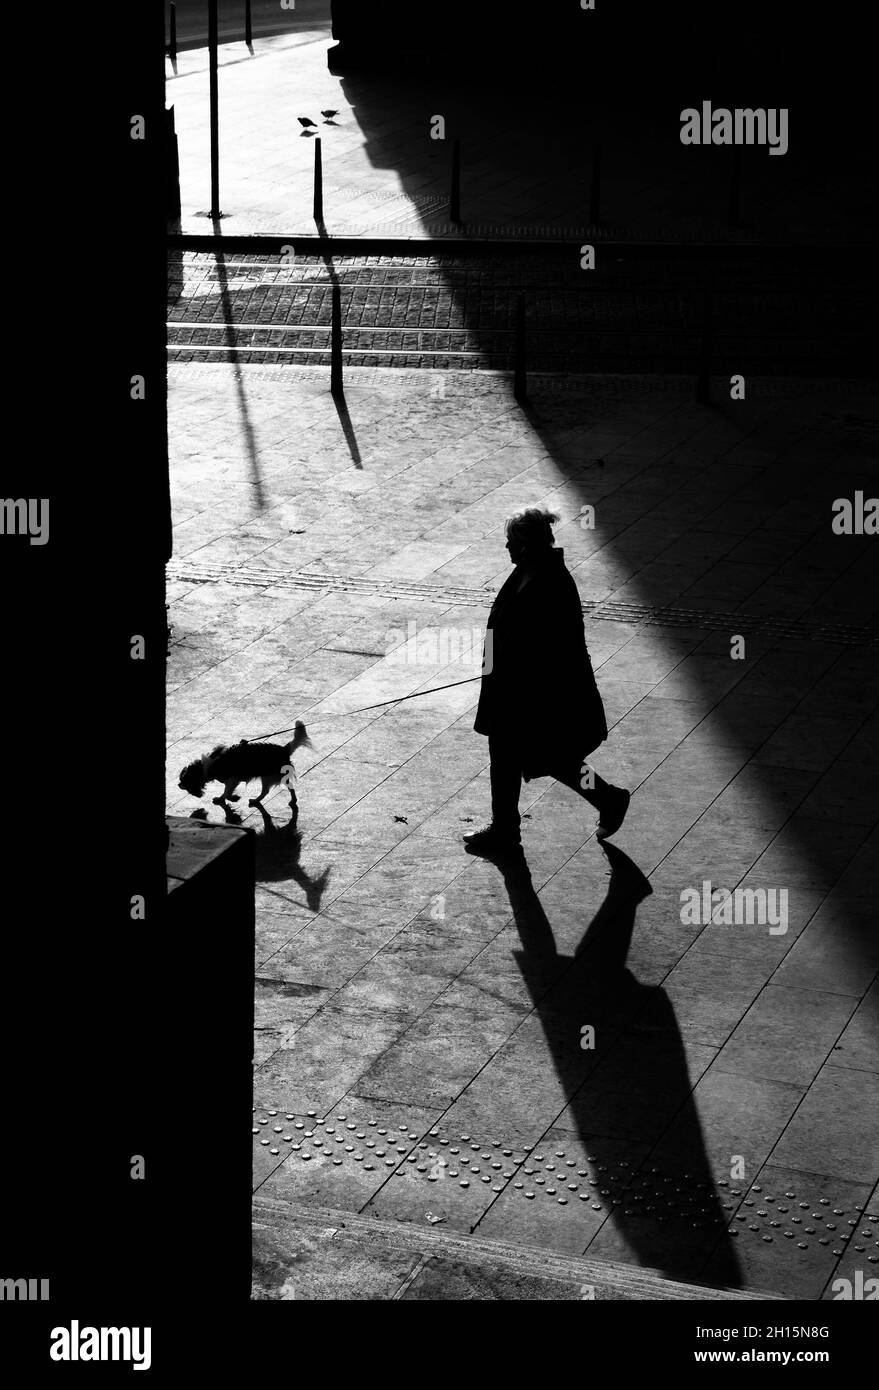 Shadow silhouette of a woman walking a small dog on a leash on city street in black and white Stock Photo